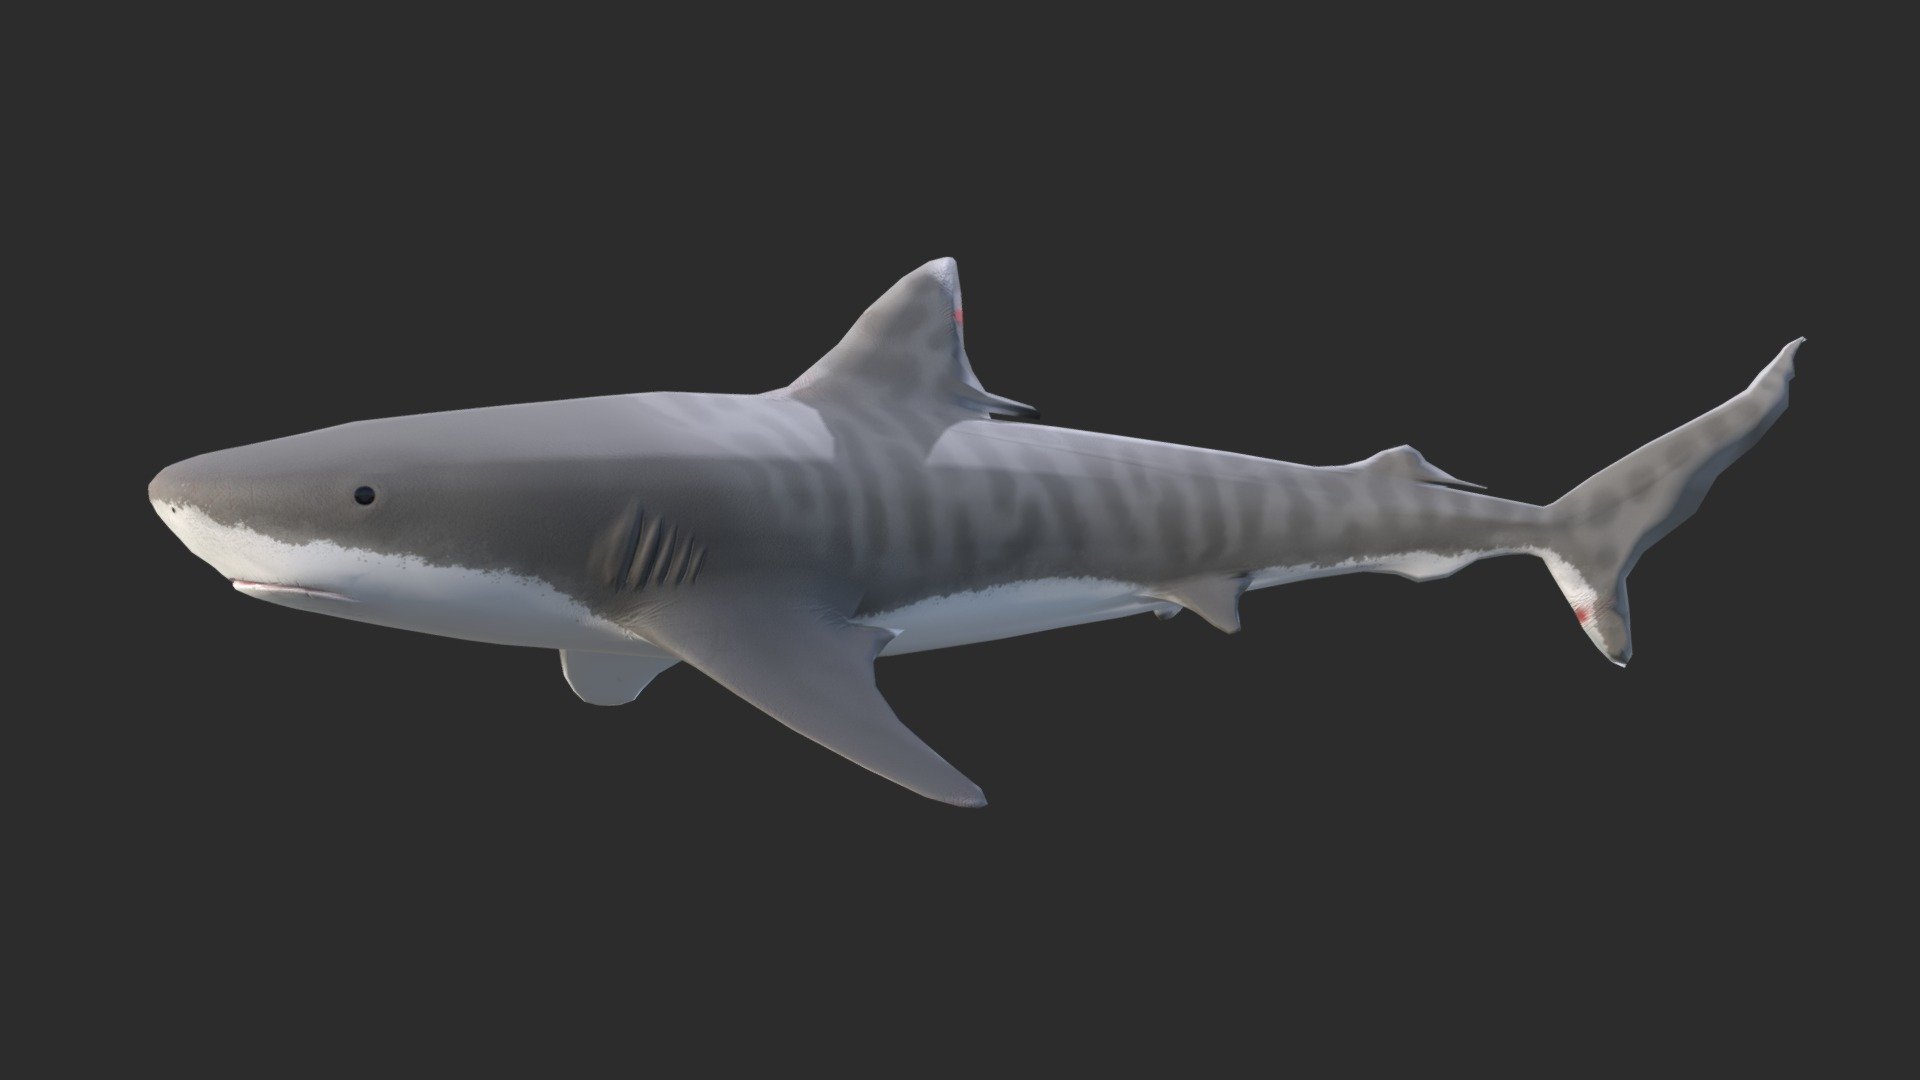 This is a model of a tiger shark (Galeocerdo Cuvier) ready for game and low poly using. The one material is ready for PBR rendering.

Originally created with Blender 2.77

Low poly model

SPECIFICATIONS




Objects : 1 

Polygons : 2086 

Subdivision ready : Yes 

Render engine : Cycles render

TEXTURES




Materials in scene : 1 

Texture size mixed (4096px) 

Textures (Diffuse, Metallic, Roughness, Normal, Heigh and AO) are included 

Textures formats : JPG/PNG

GENERAL




Real scale : Yes 

Scene objects are organized by groups
 - Tiger Shark (Galeocerdo Cuvier) - Buy Royalty Free 3D model by KangaroOz 3D (@KangaroOz-3D) 3d model